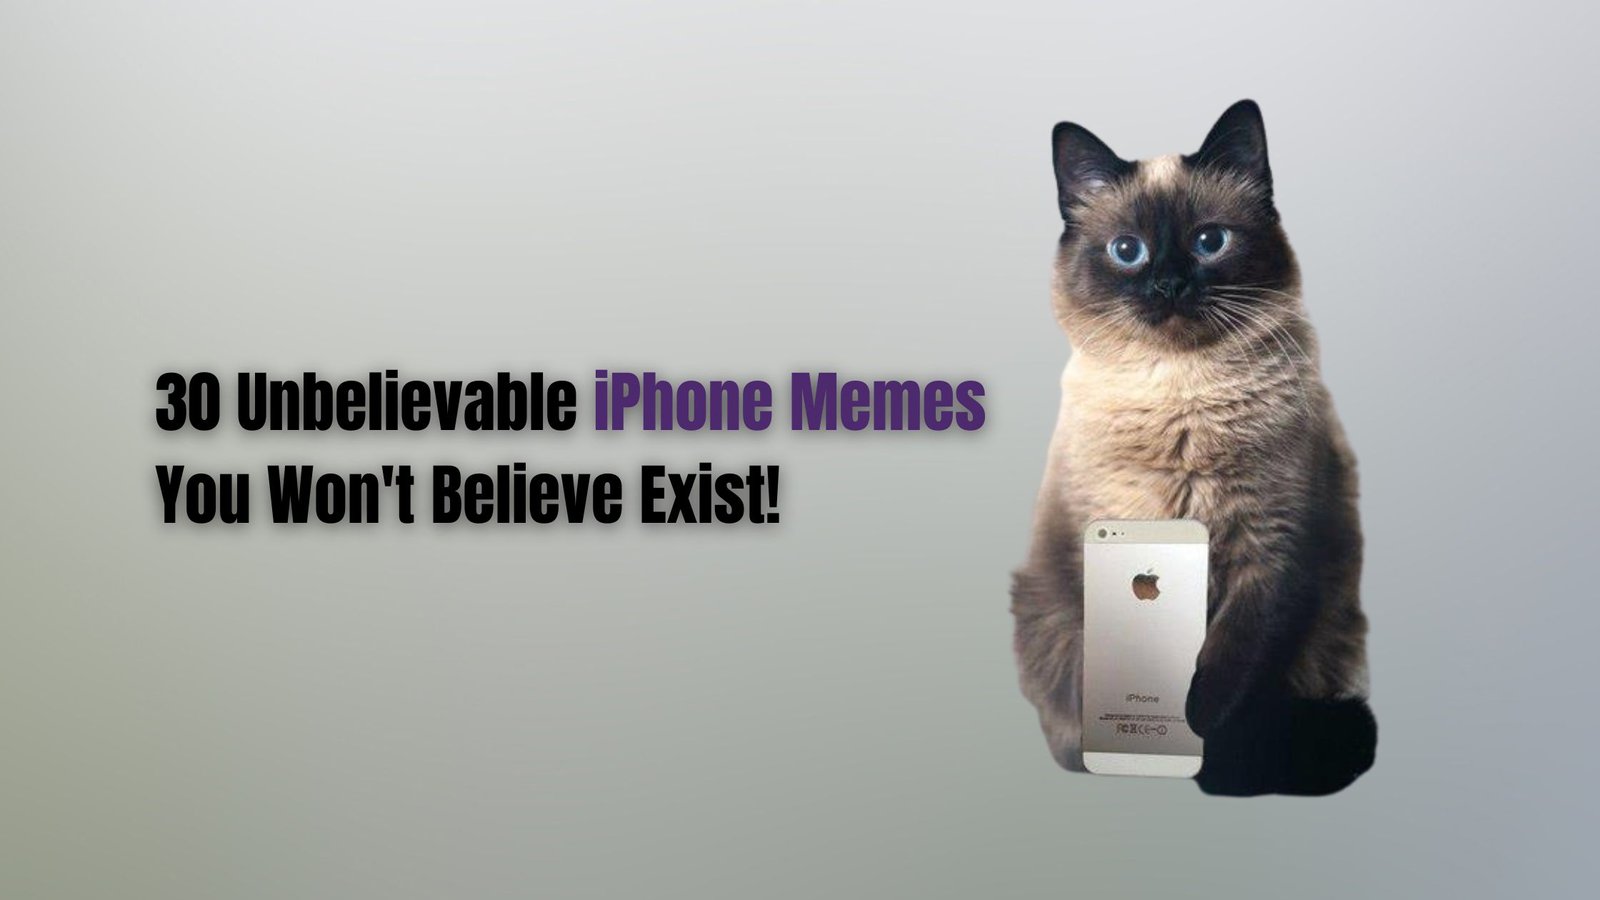 Cat with an iPhone